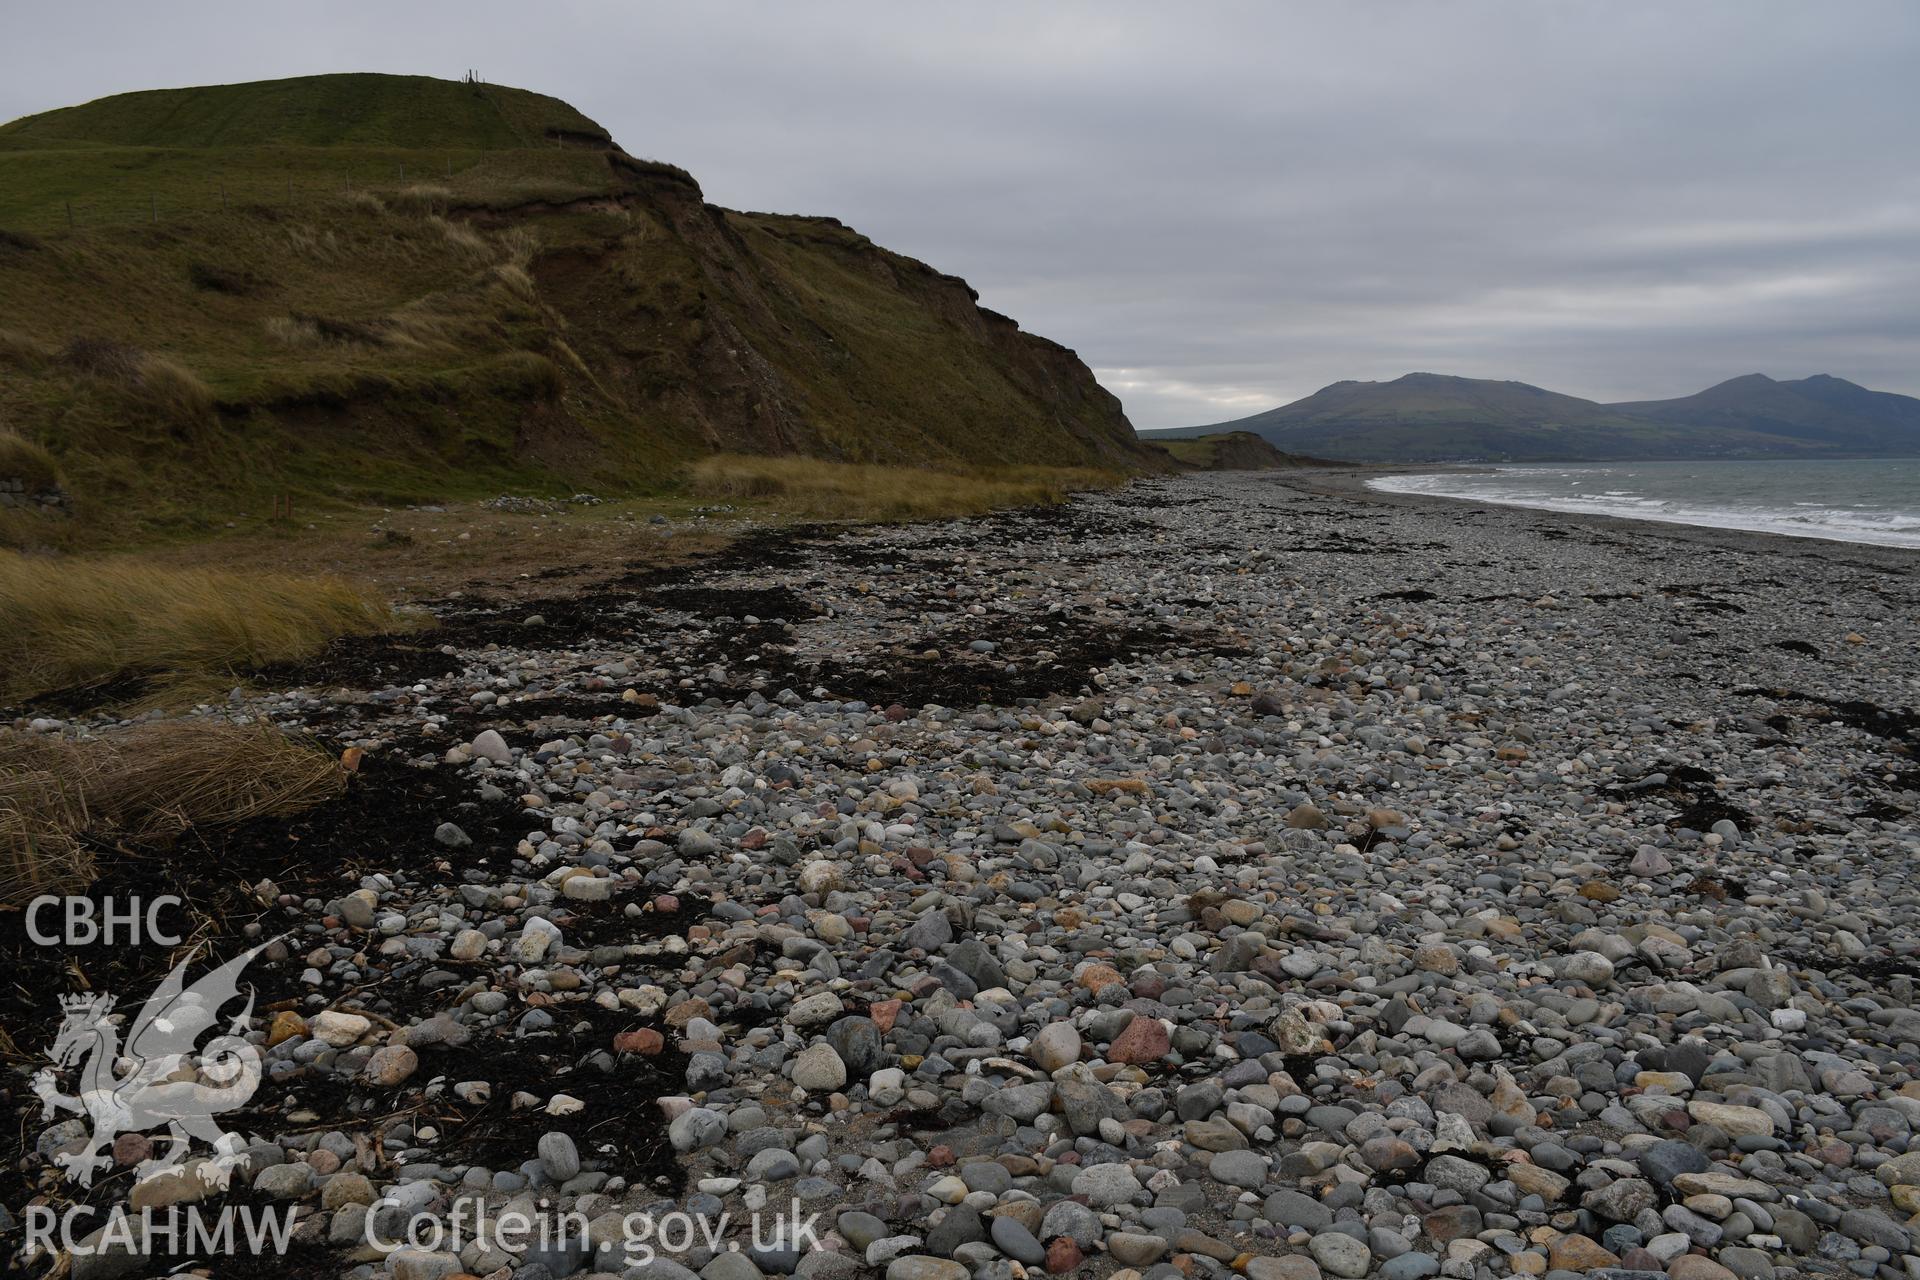 Looking south along the beach and eroding coast. Taken by Hannah Genders Boyd. Produced with EU funds through the Ireland Wales Co-operation Programme 2014-2023. All material made freely available through the Open Government Licence.